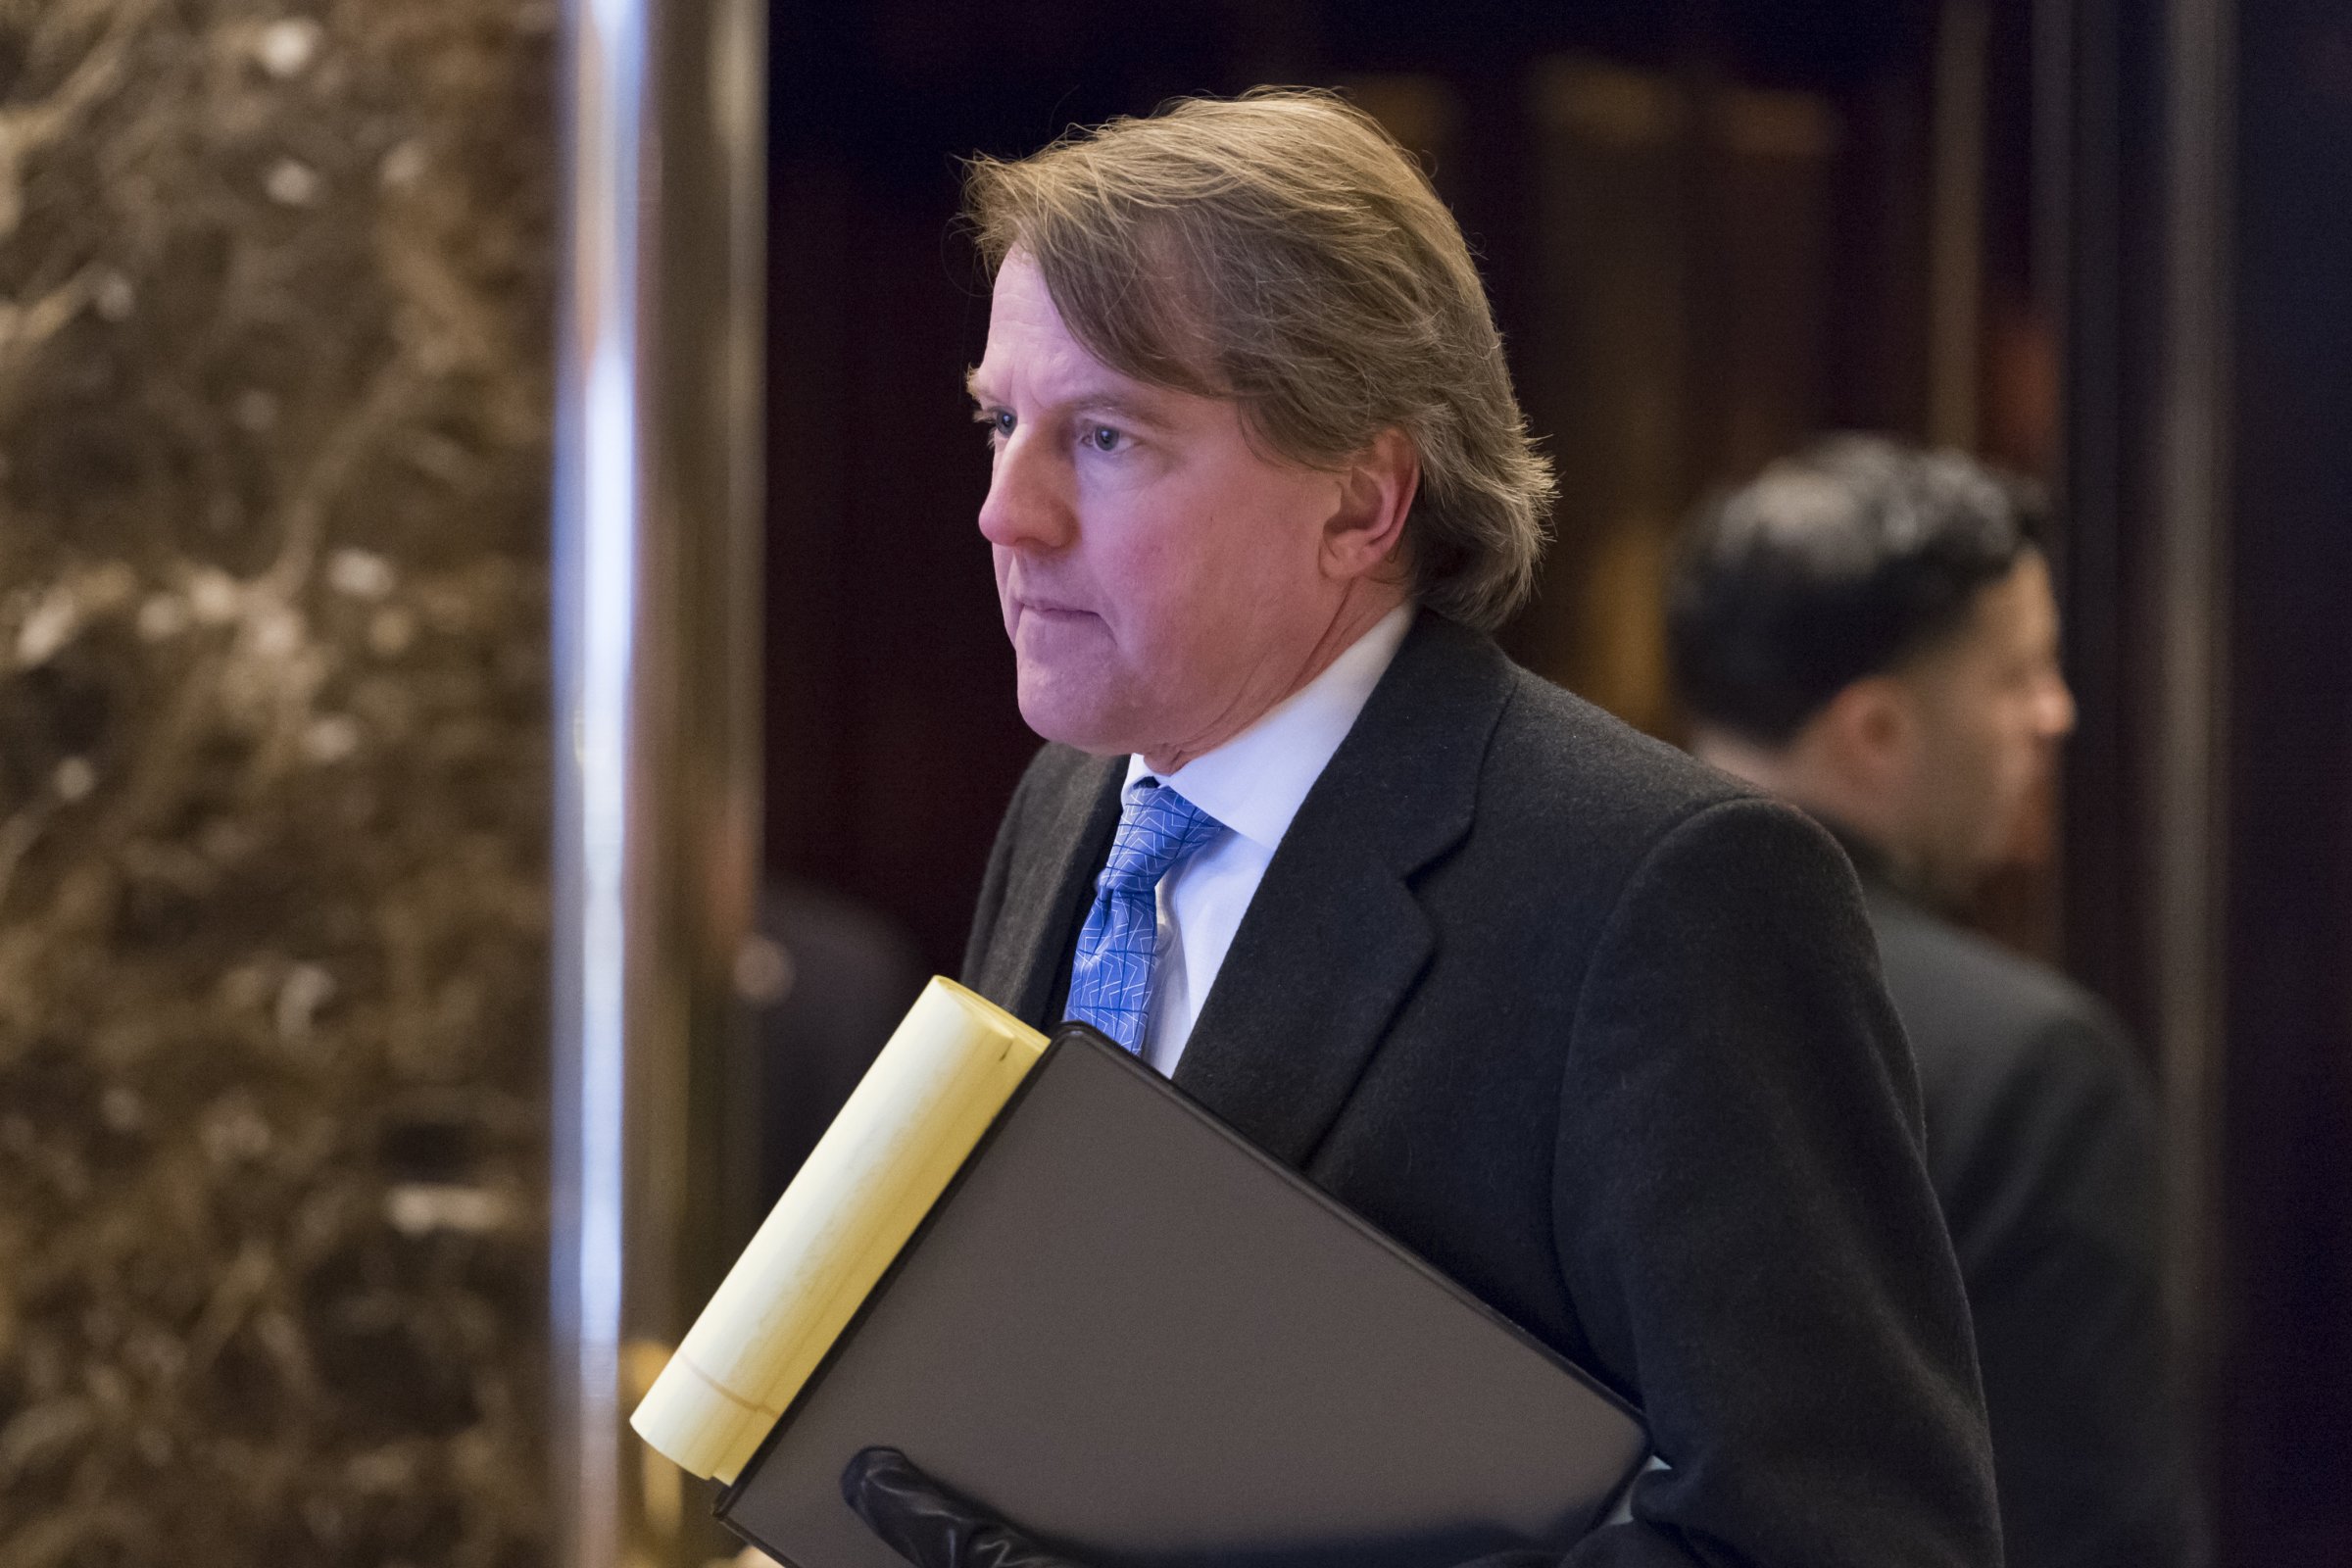 Attorney and United States Federal Election Commission member Don McGahn seen at Trump Tower lobby